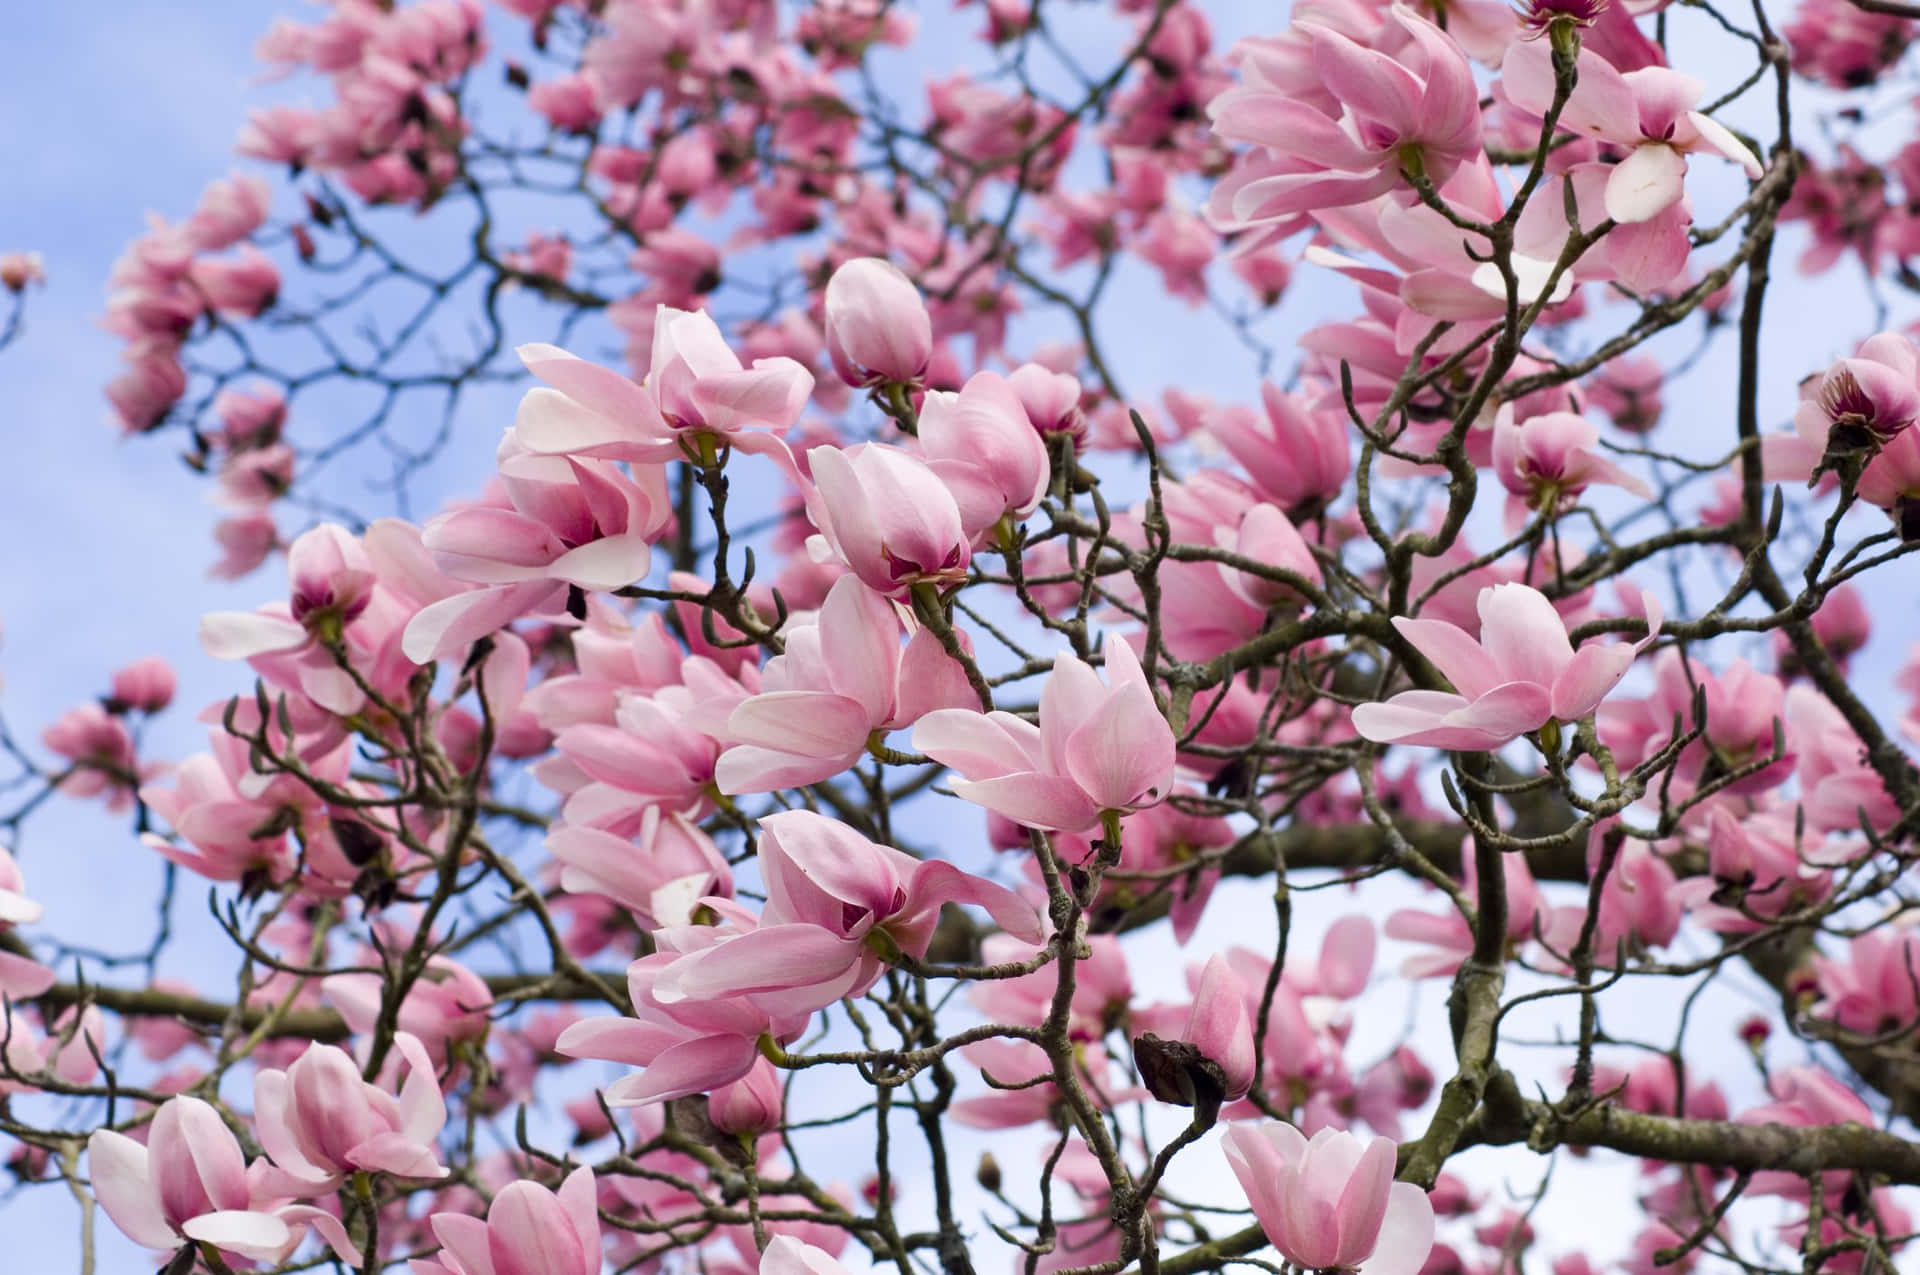 A pink magnolia flower in full bloom